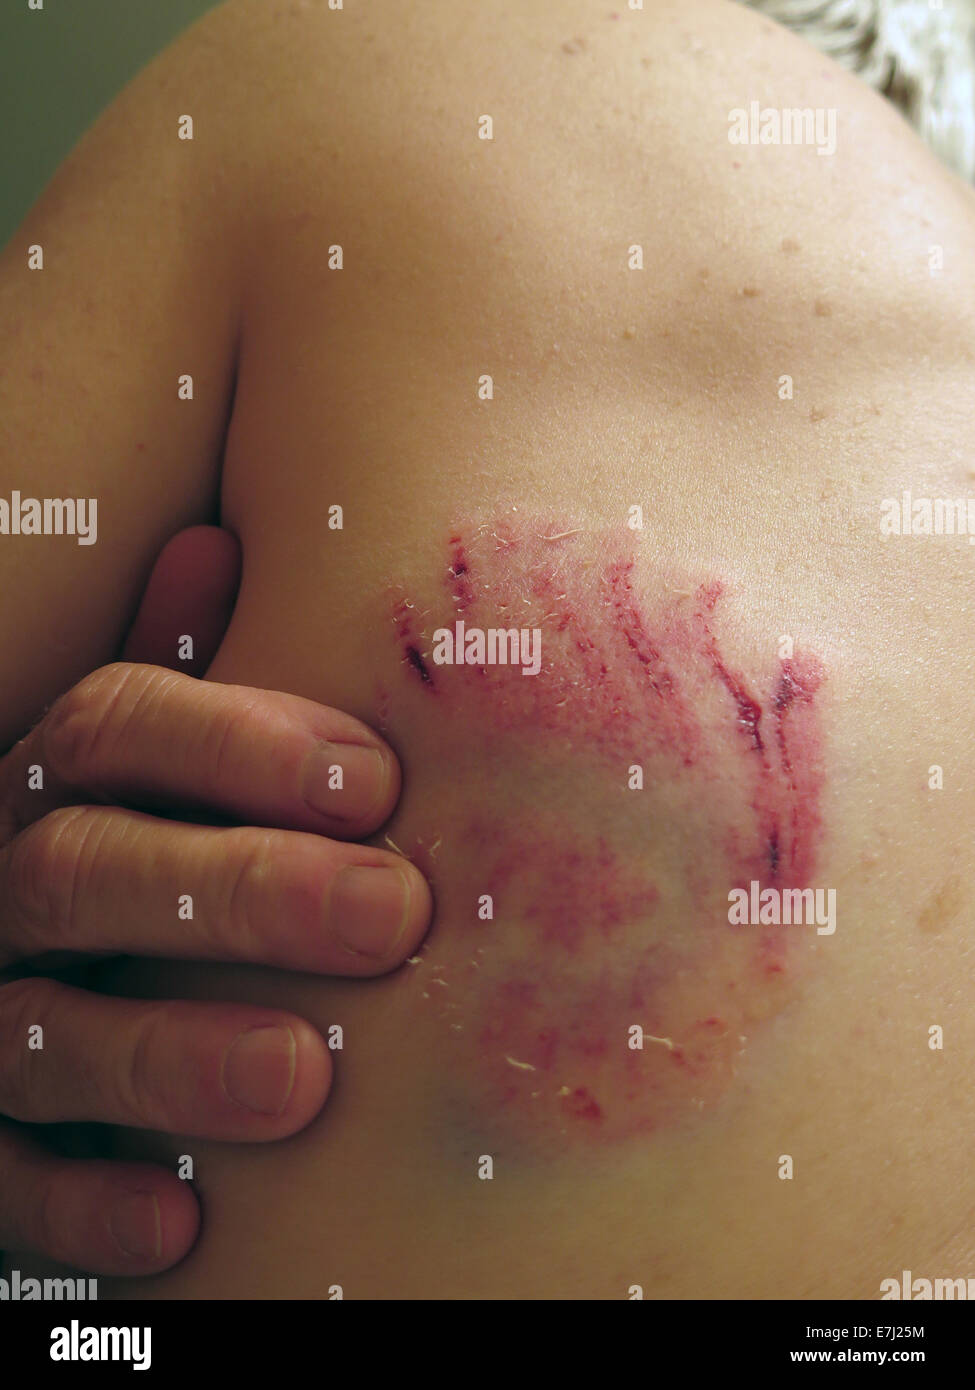 Older Caucasian woman with a dog bite on her back. Stock Photo